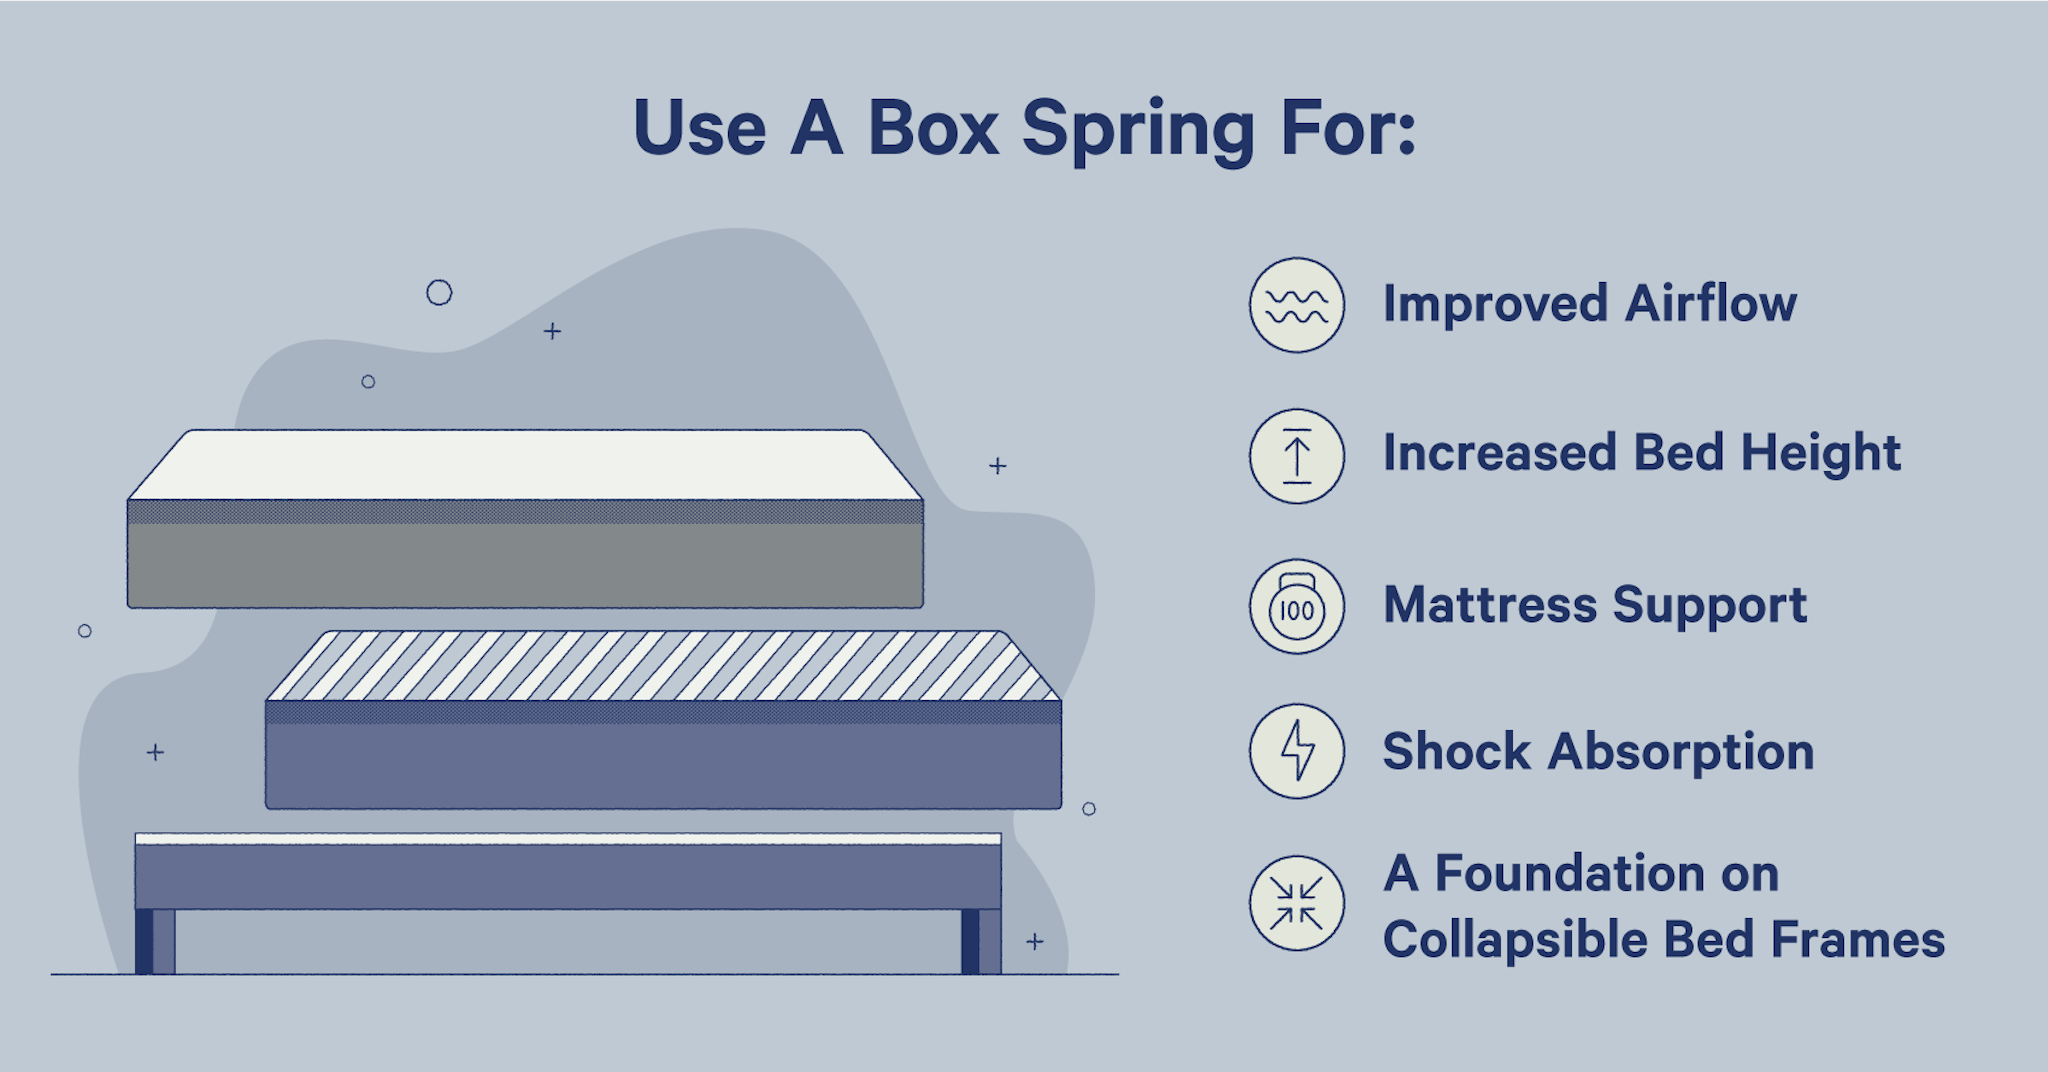 can i use boxspring for puffy mattress